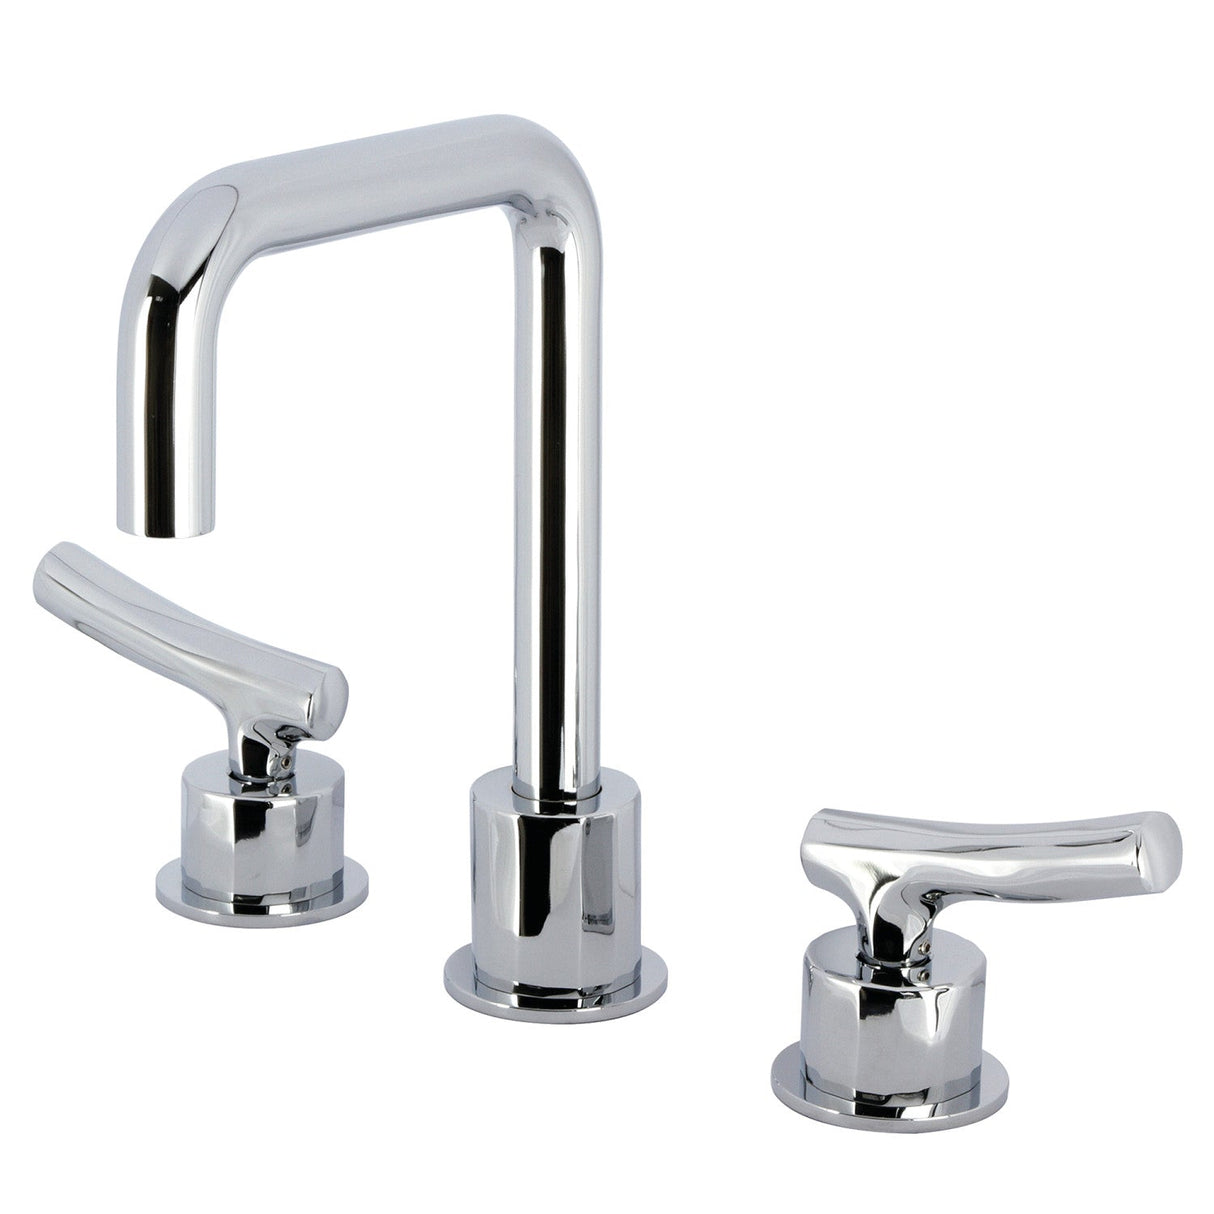 Hallerbos KS1451TKL Two-Handle 3-Hole Deck Mount Widespread Bathroom Faucet with Push Pop-Up, Polished Chrome